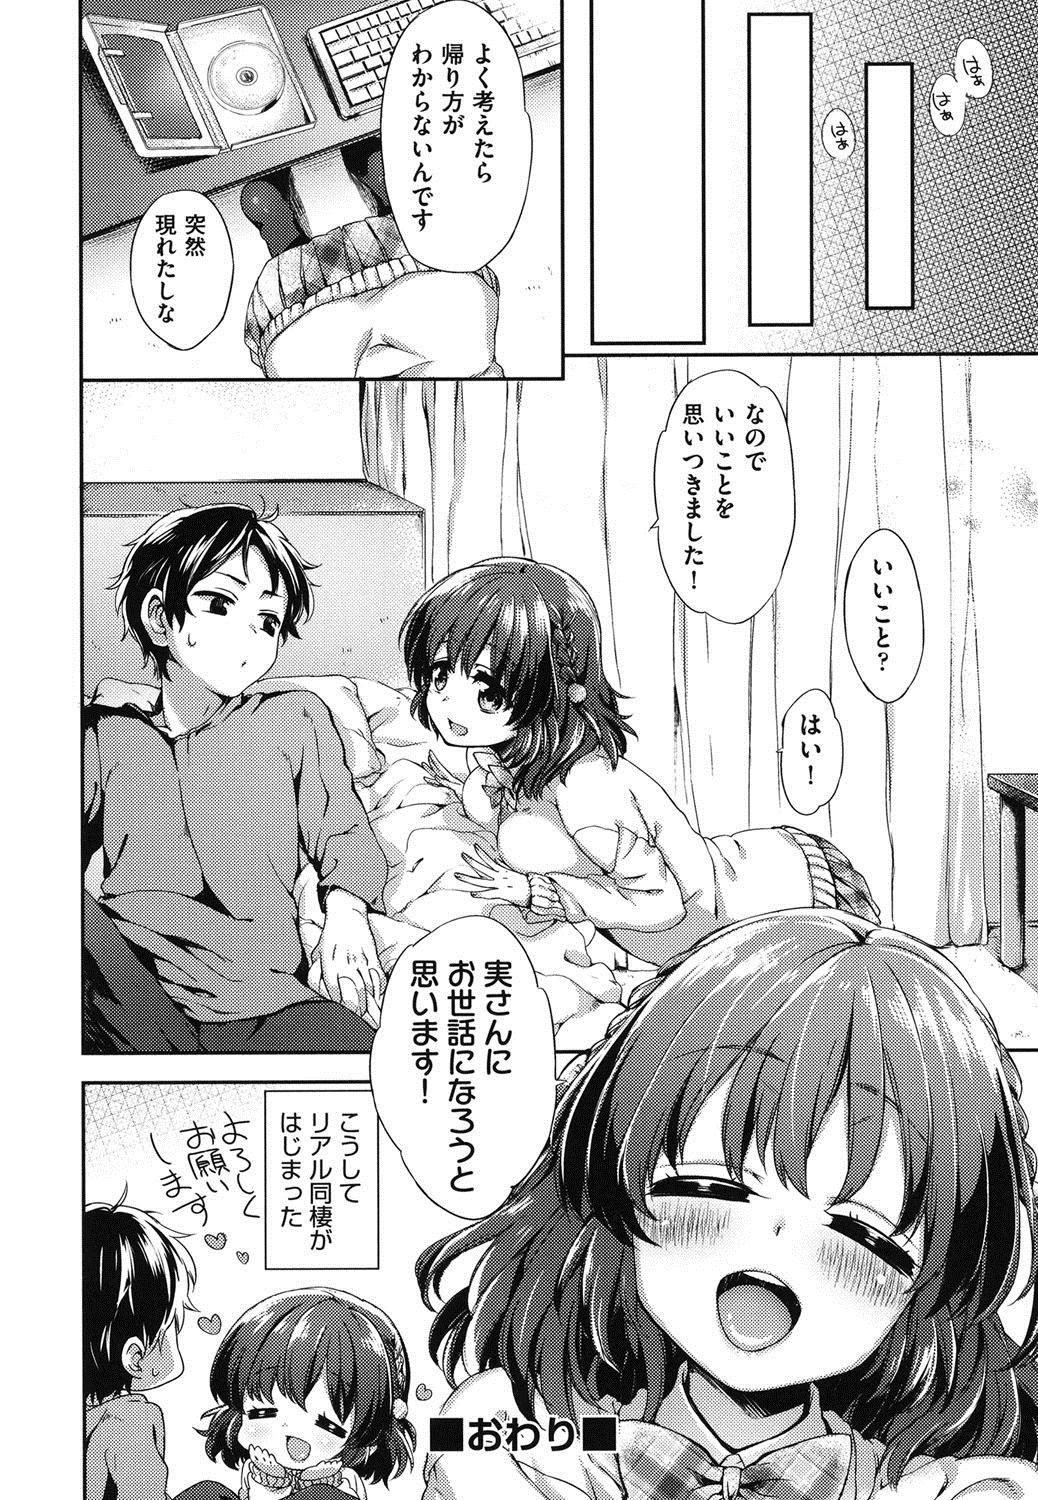 Oppai March 84